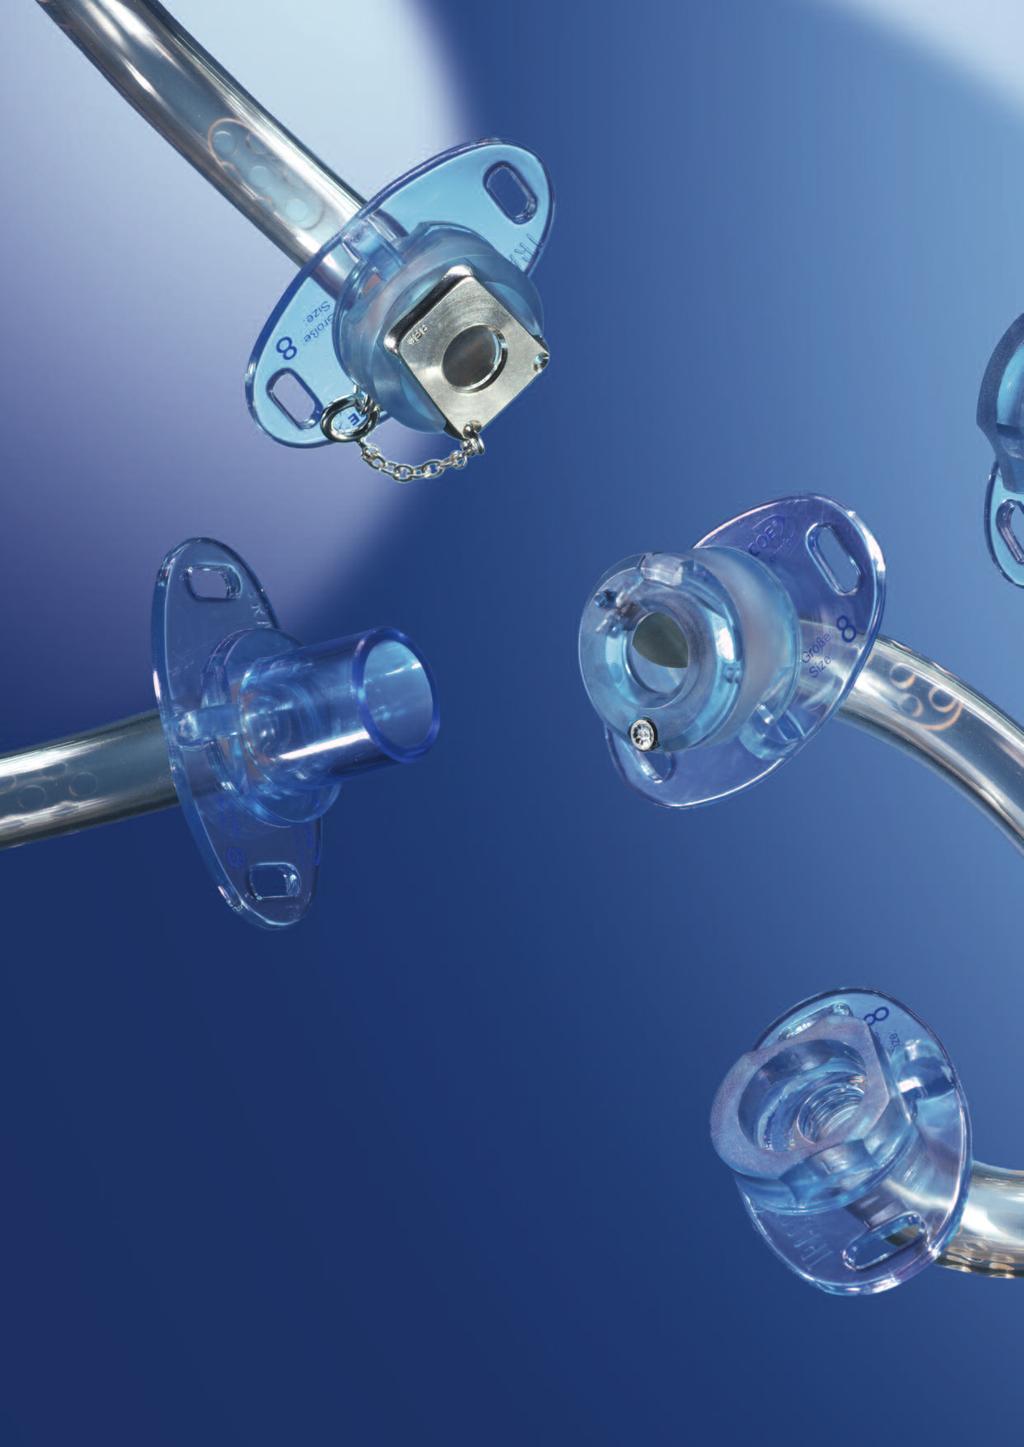 Tracoe comfort Tracheostomy Tubes Key features Light, Tracoetwist flexible, soft range and pliable features - harmless to tissue, adapting easily to the trachea Made from implant tested medical grade